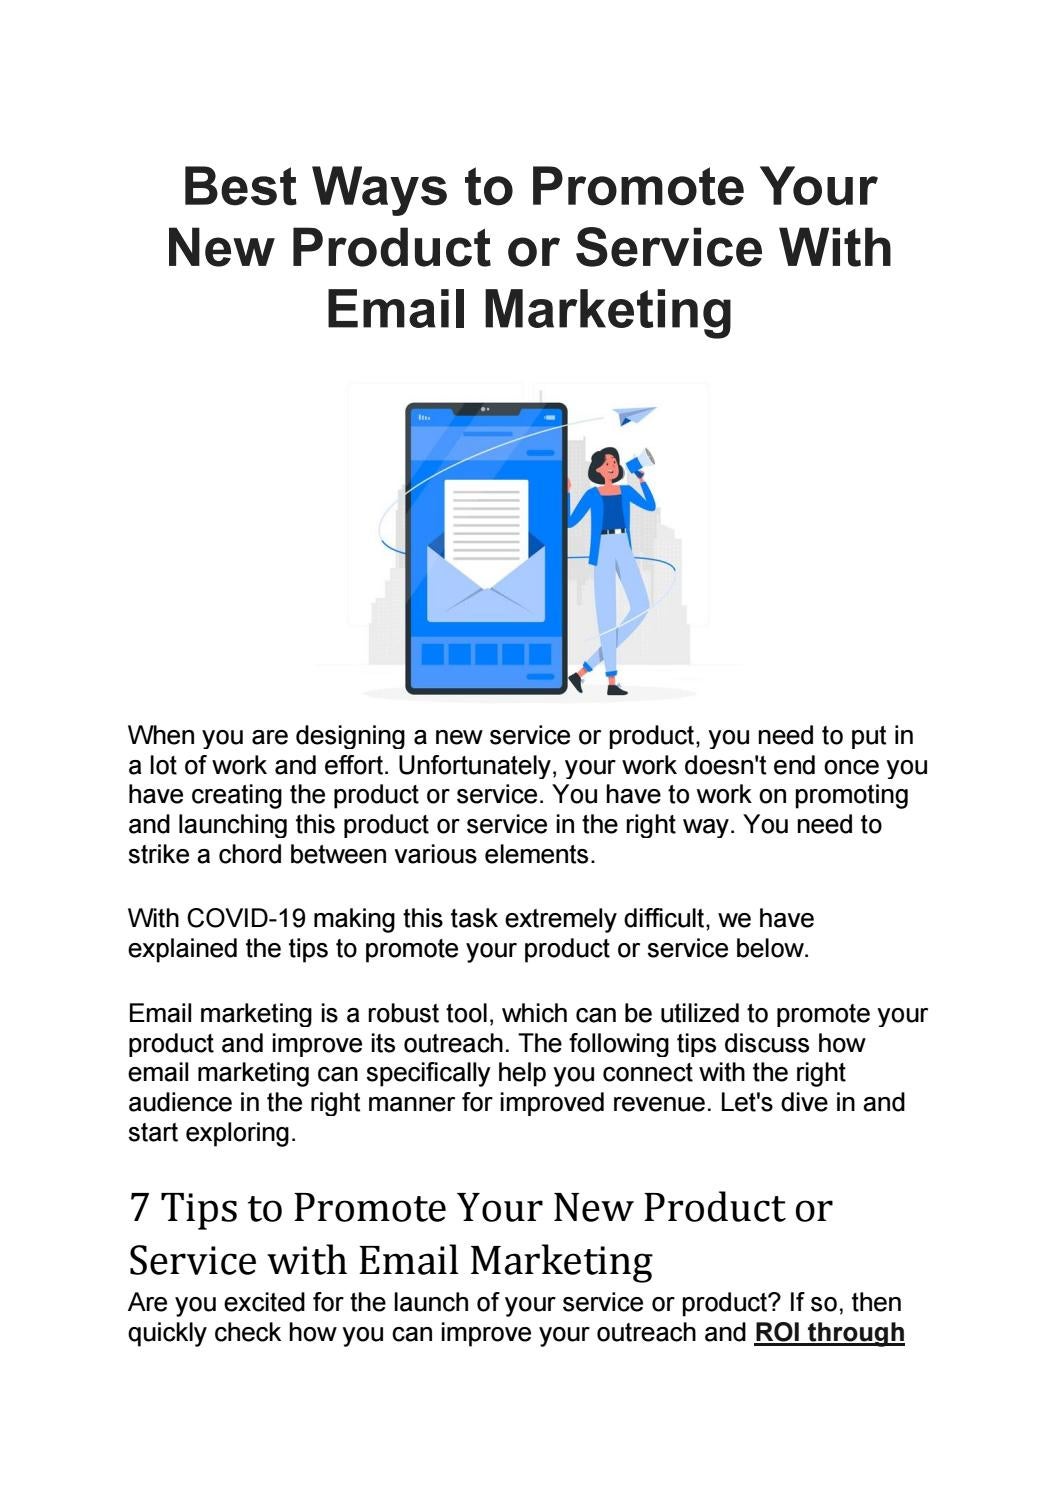 Best Ways to Promote Your New Product or Service With Email Marketing by SpiceSend - Issuu